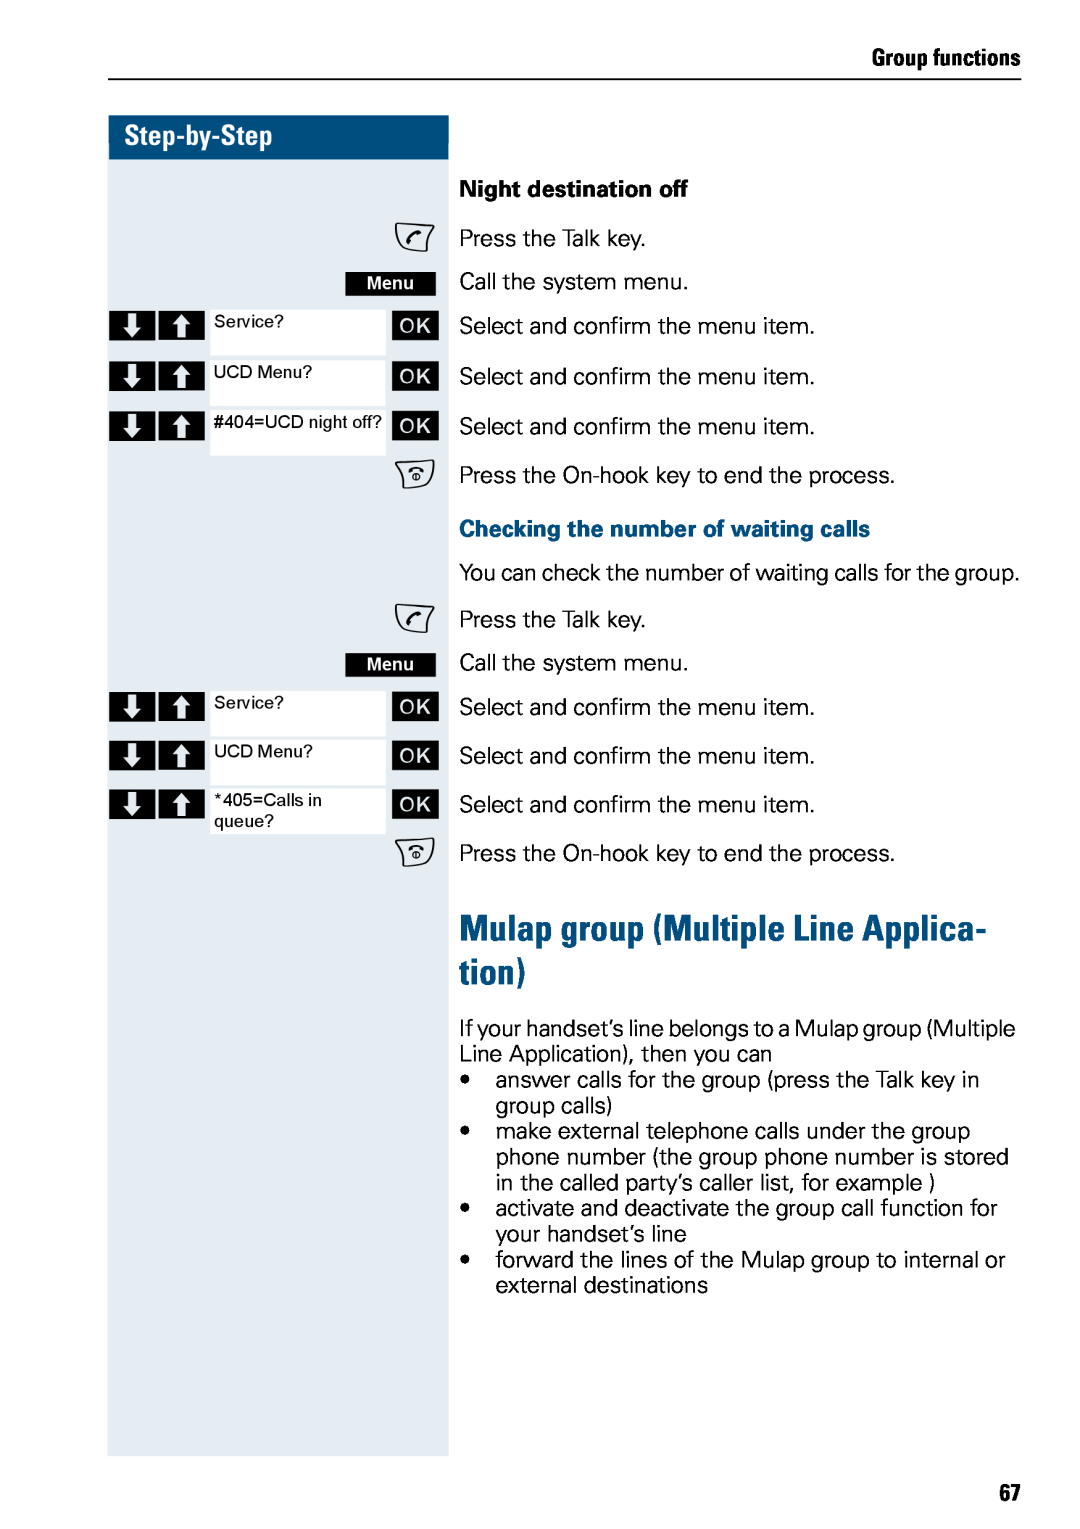 Siemens 500 manual Mulap group Multiple Line Applica- tion, Step-by-Step, Group functions, Night destination off 